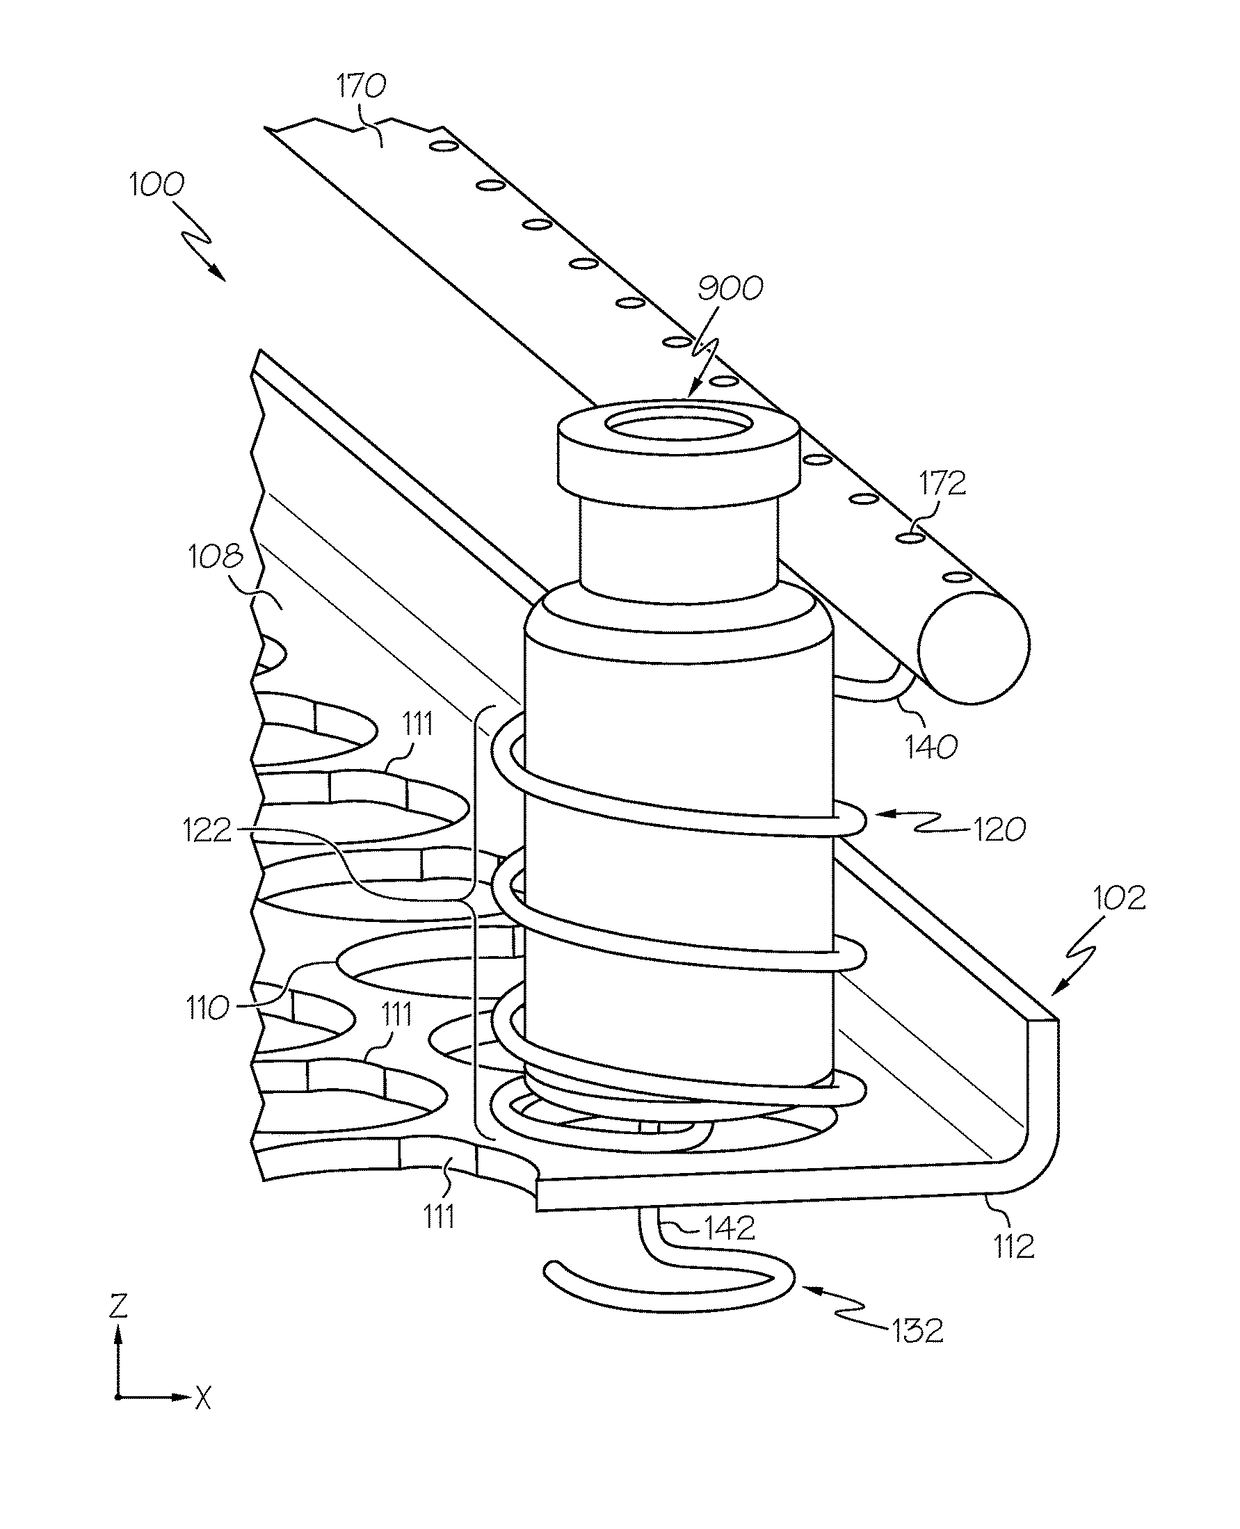 Magazine apparatuses for holding glassware during processing